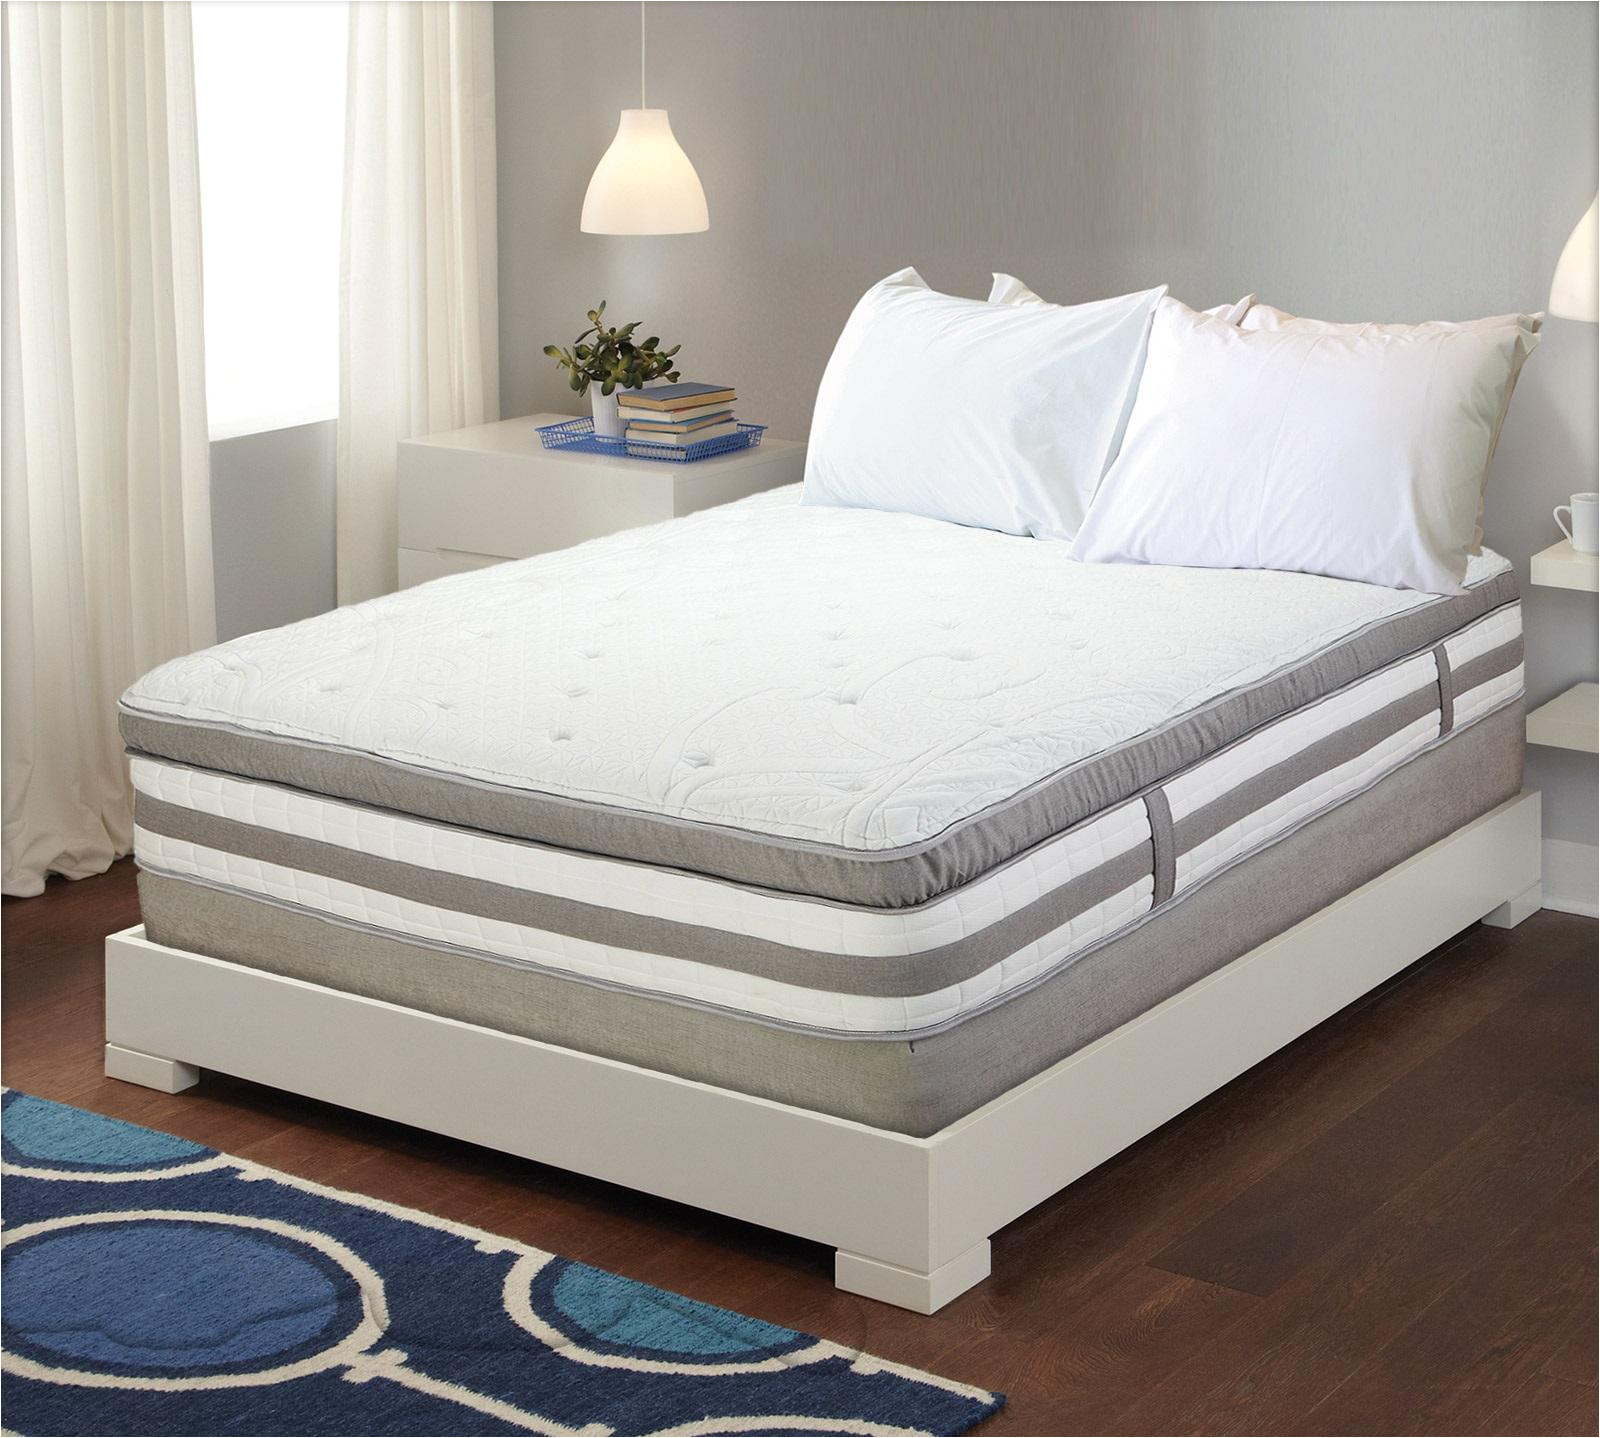 shop web specials from king size bed frame sears